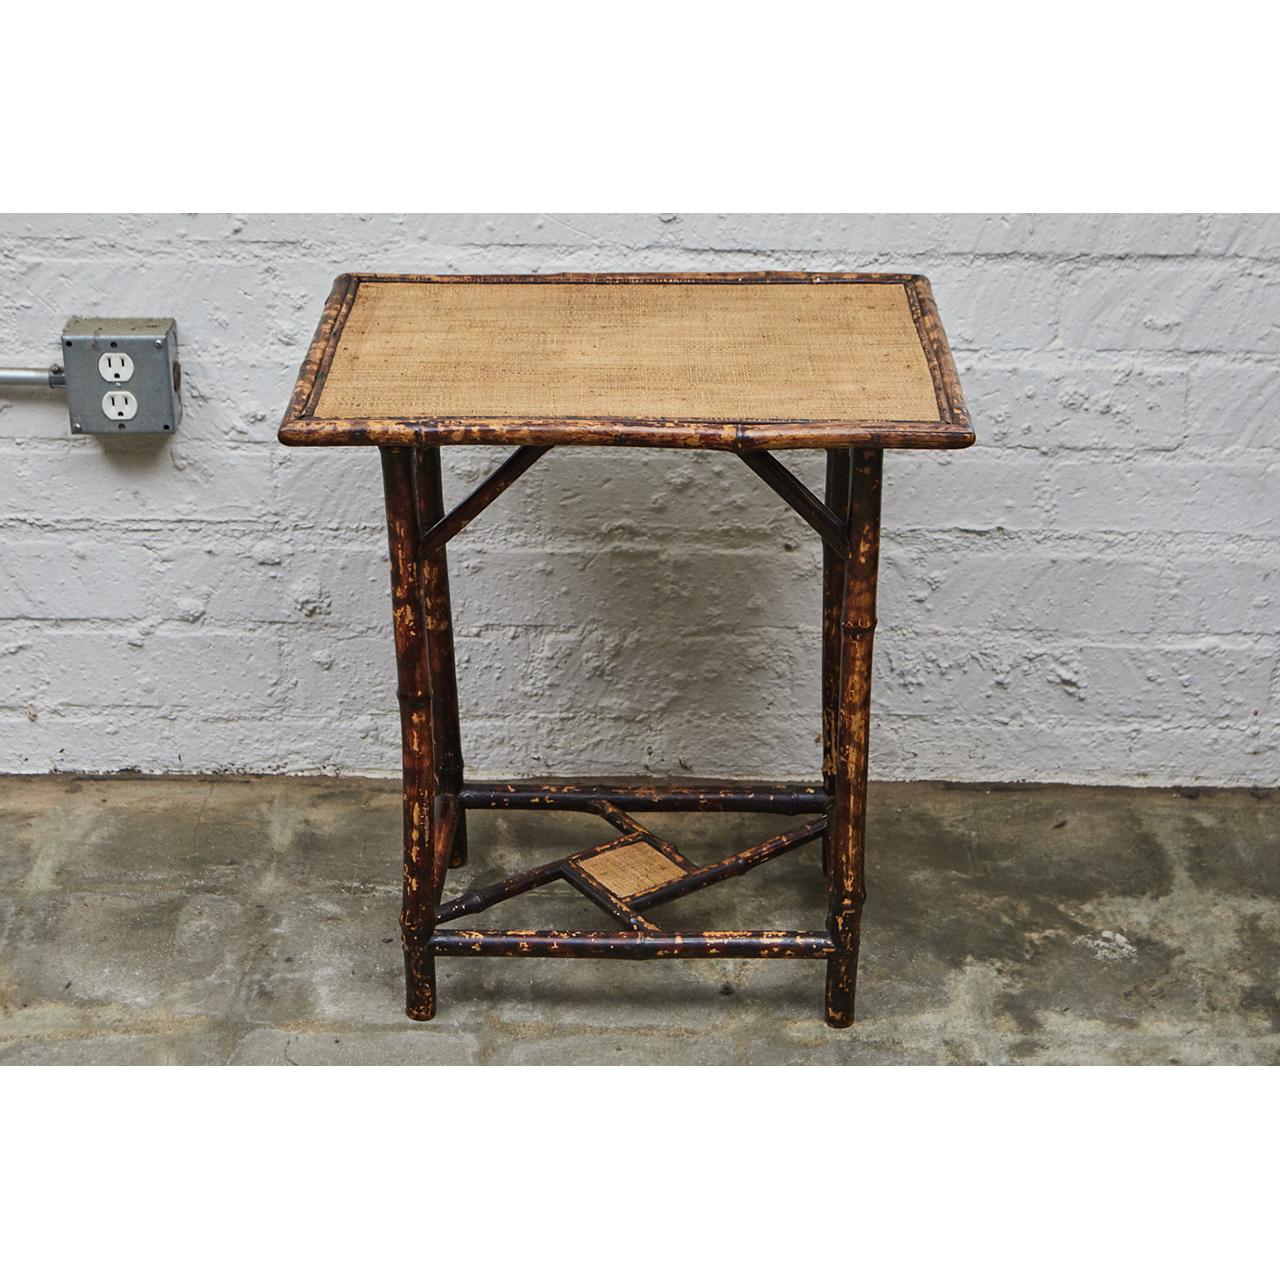 This Victorian side table is made of tiger bamboo with newly re-surfaced waxed raffia matting. The table has diagonal supports and a diamond detail in the stretcher pattern. The legs have been reinforced with dowels for increased sturdiness. We have